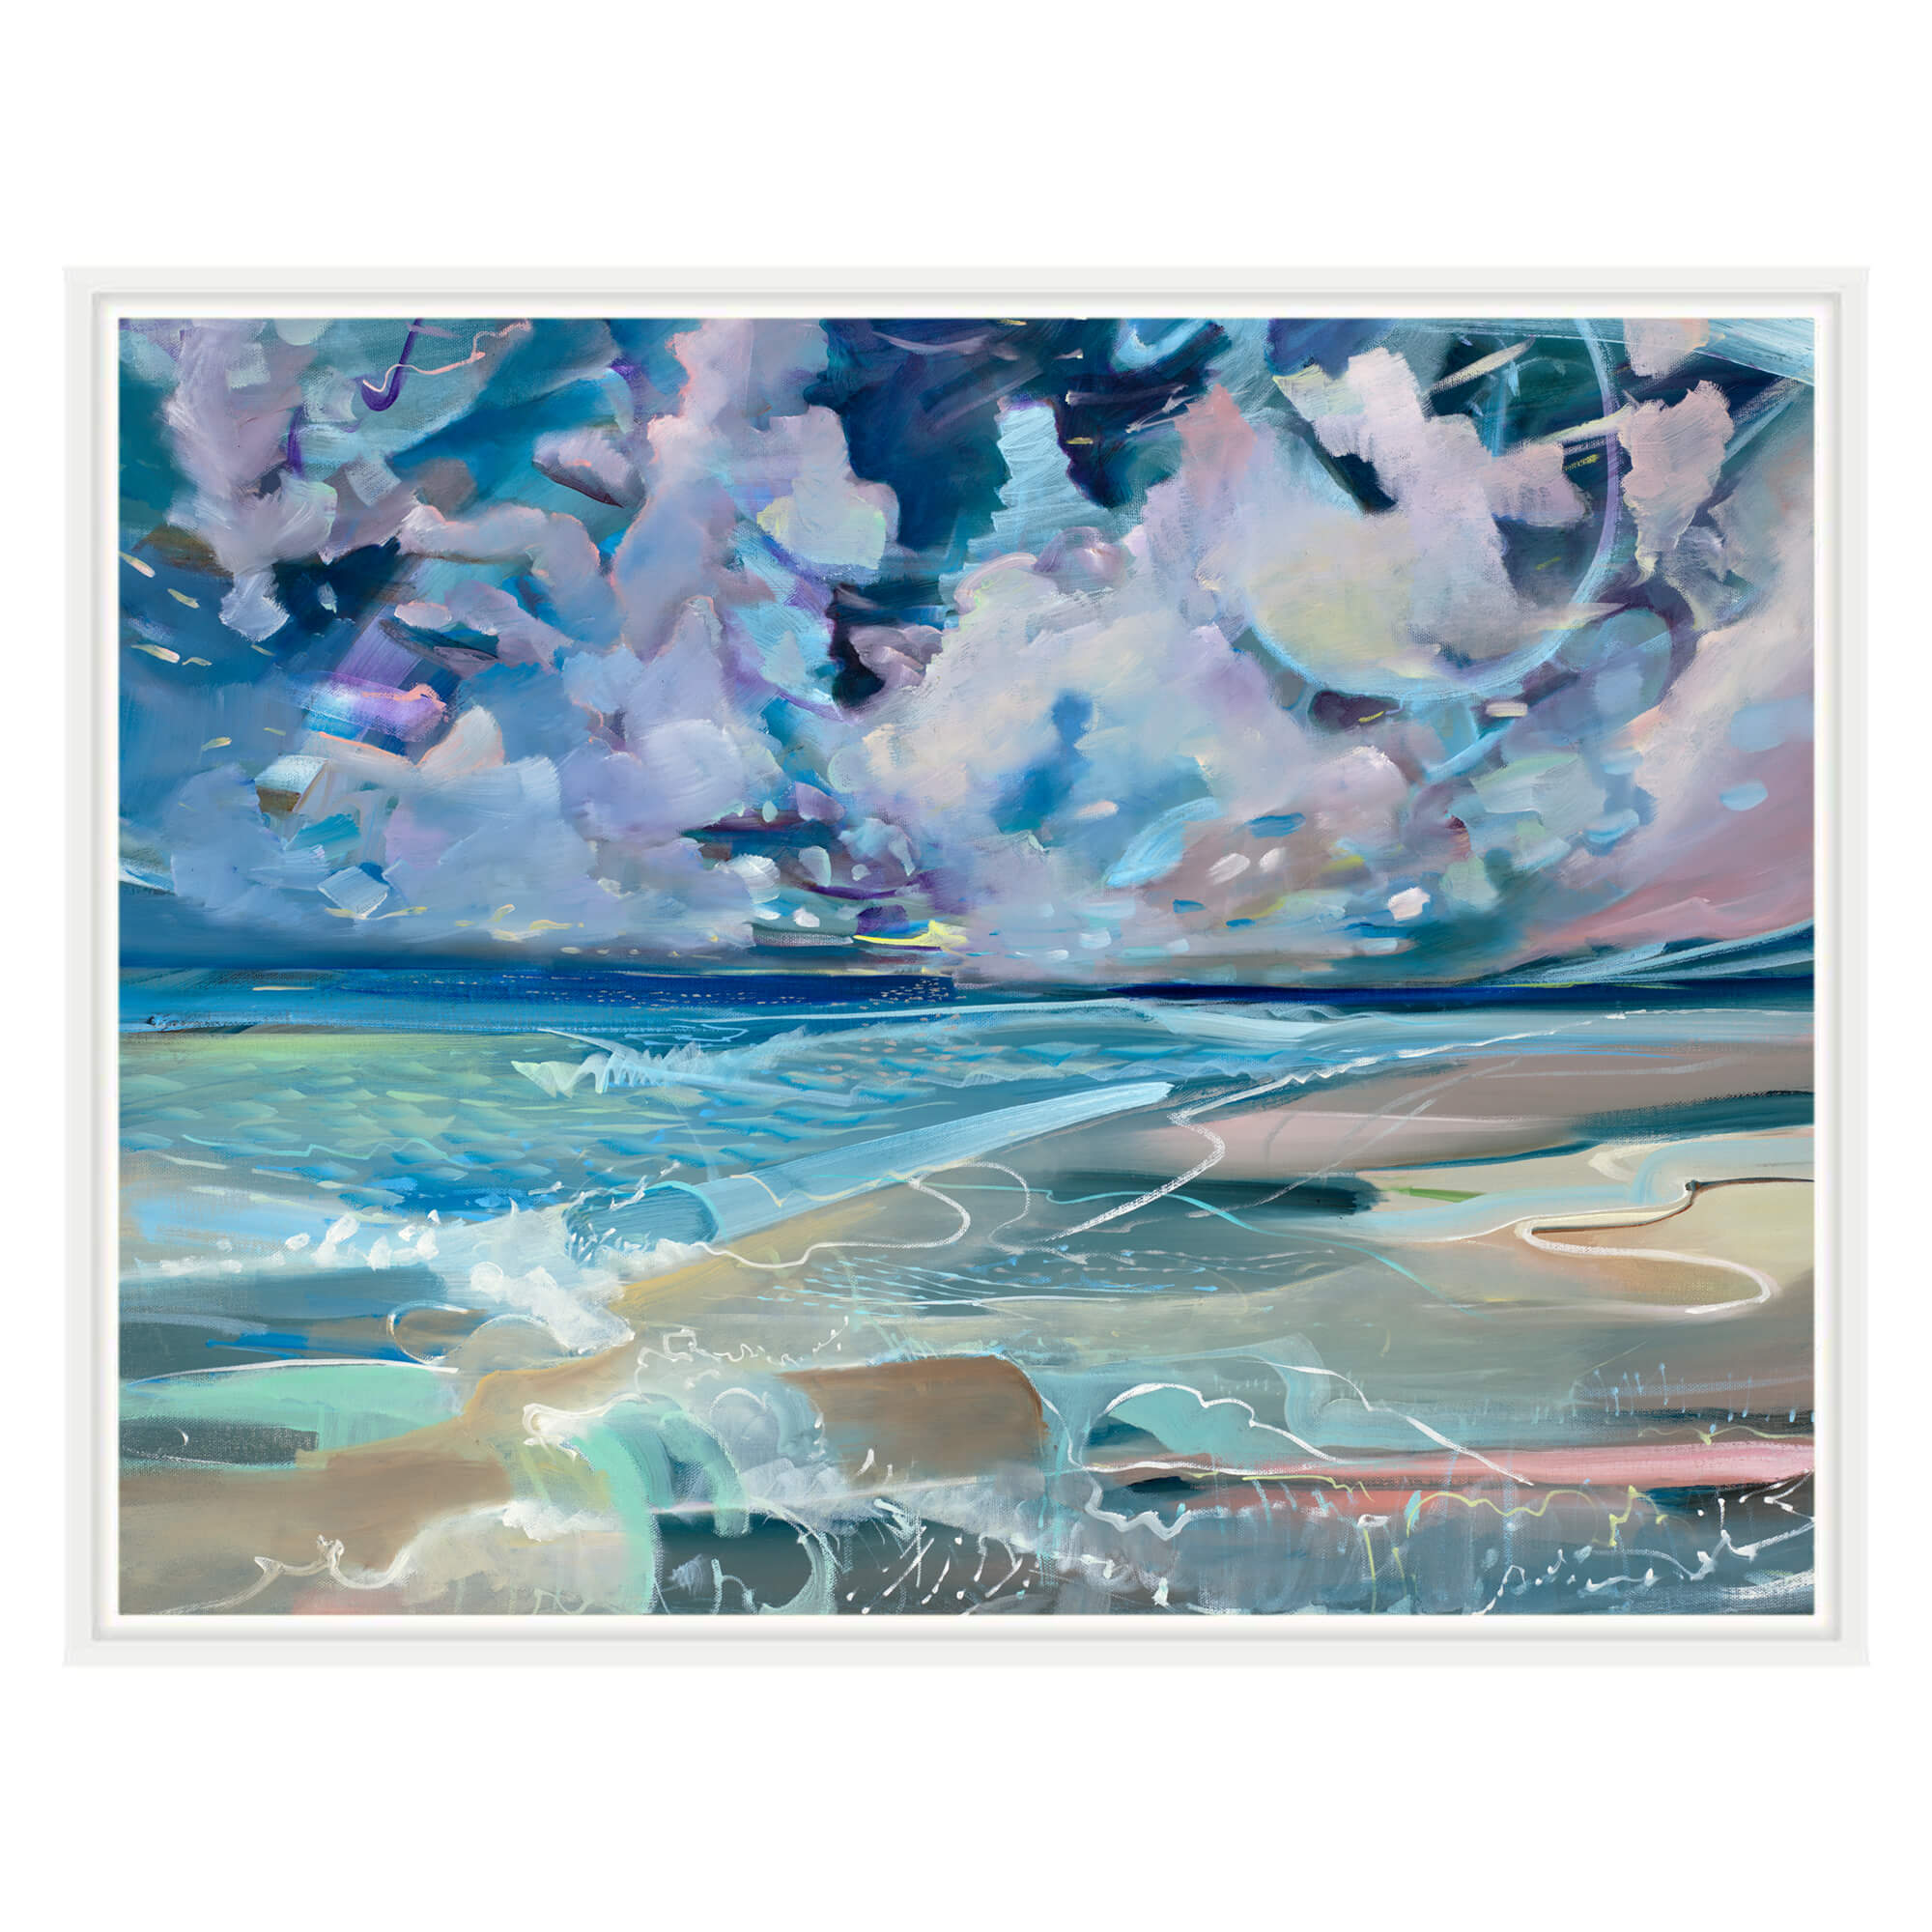 Colorful abstract painting featuring Hawaii's classic beach view by Hawaii artist Saumolia Puapuaga